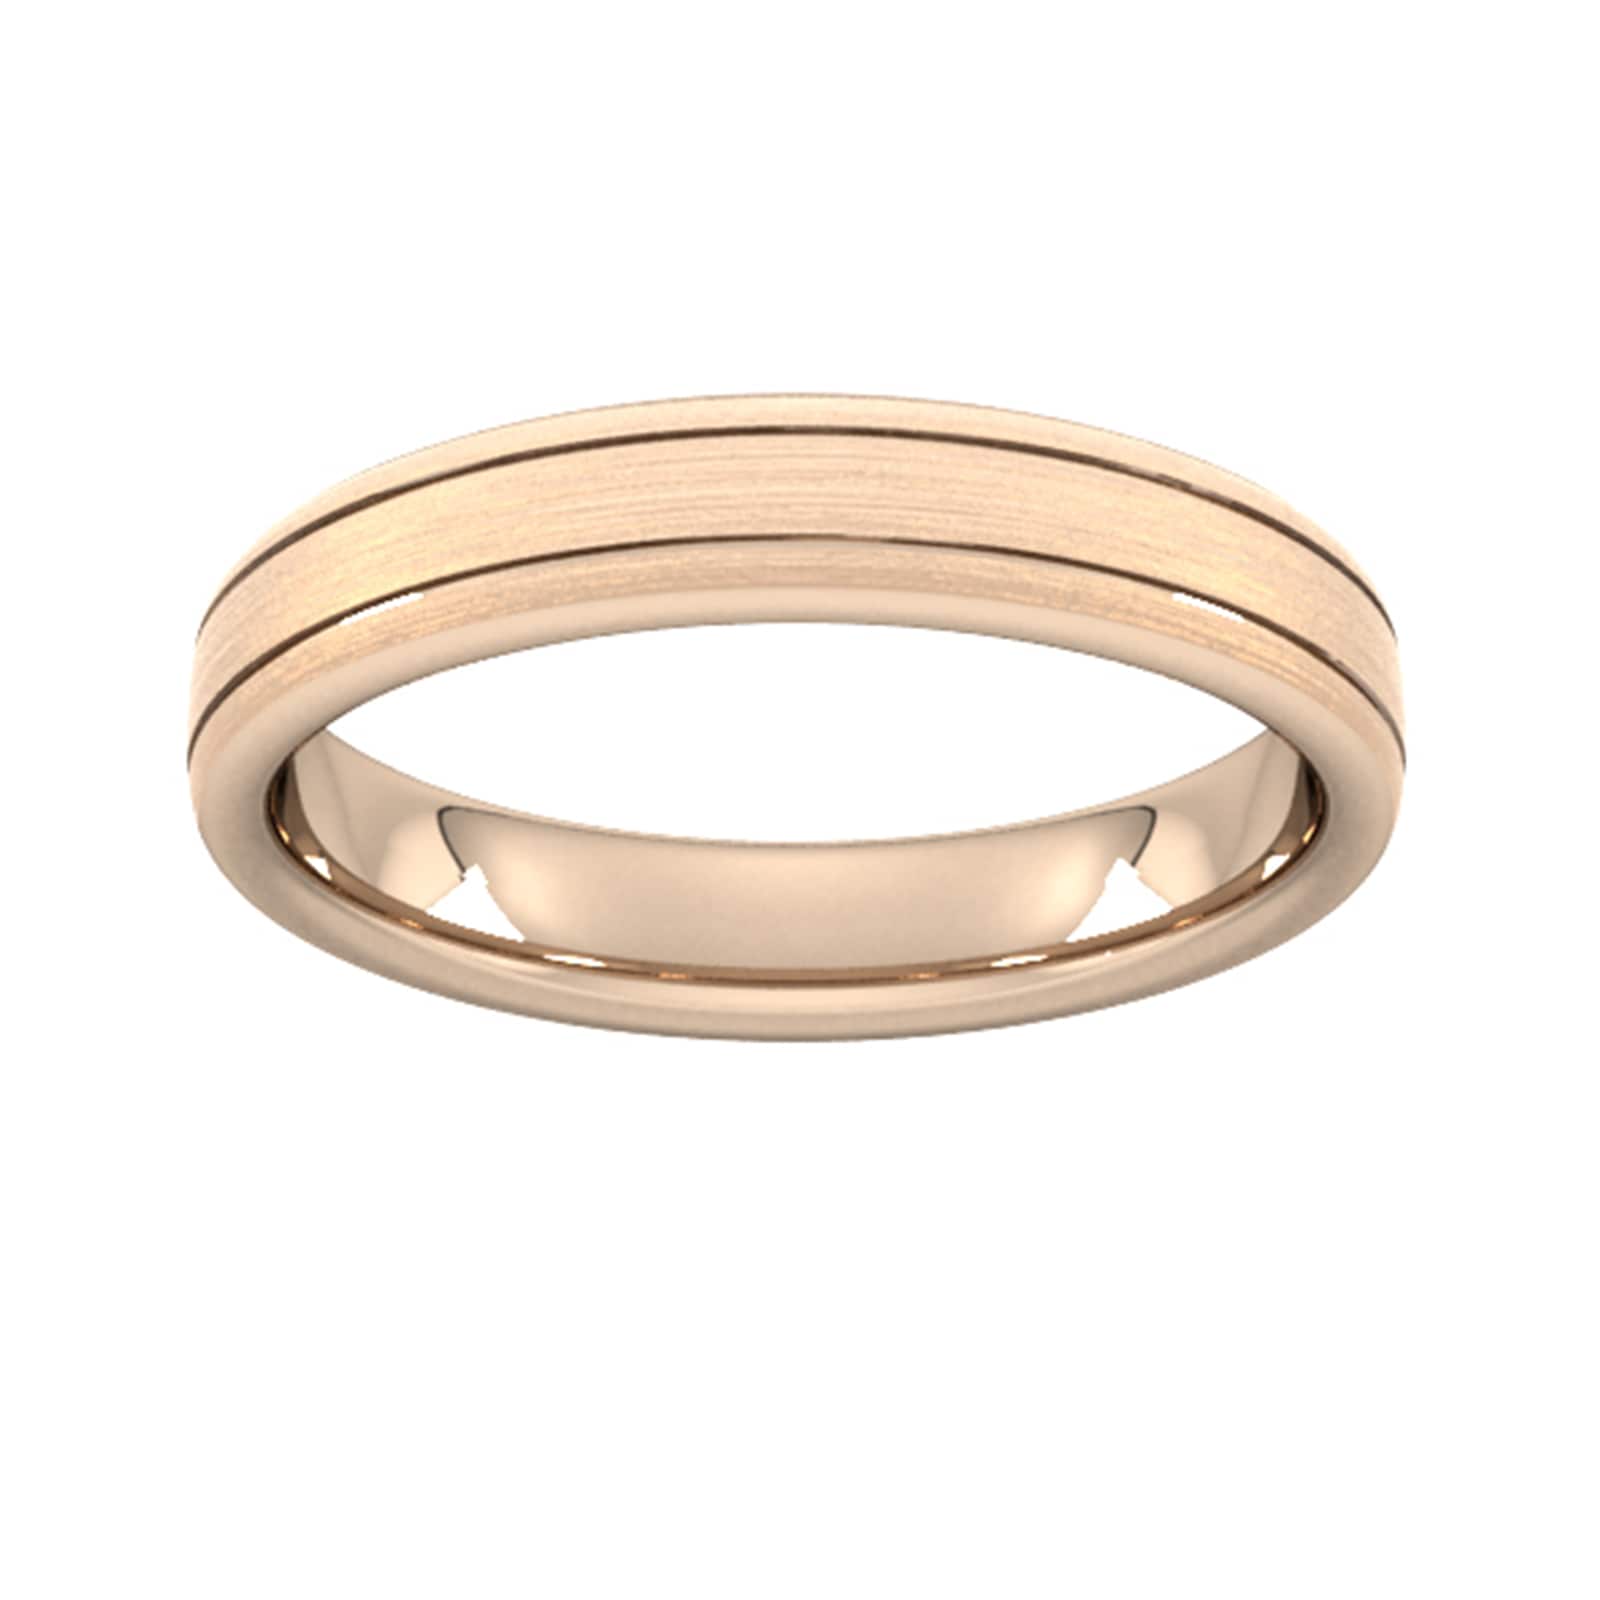 4mm Traditional Court Standard Matt Finish With Double Grooves Wedding Ring In 9 Carat Rose Gold - Ring Size N